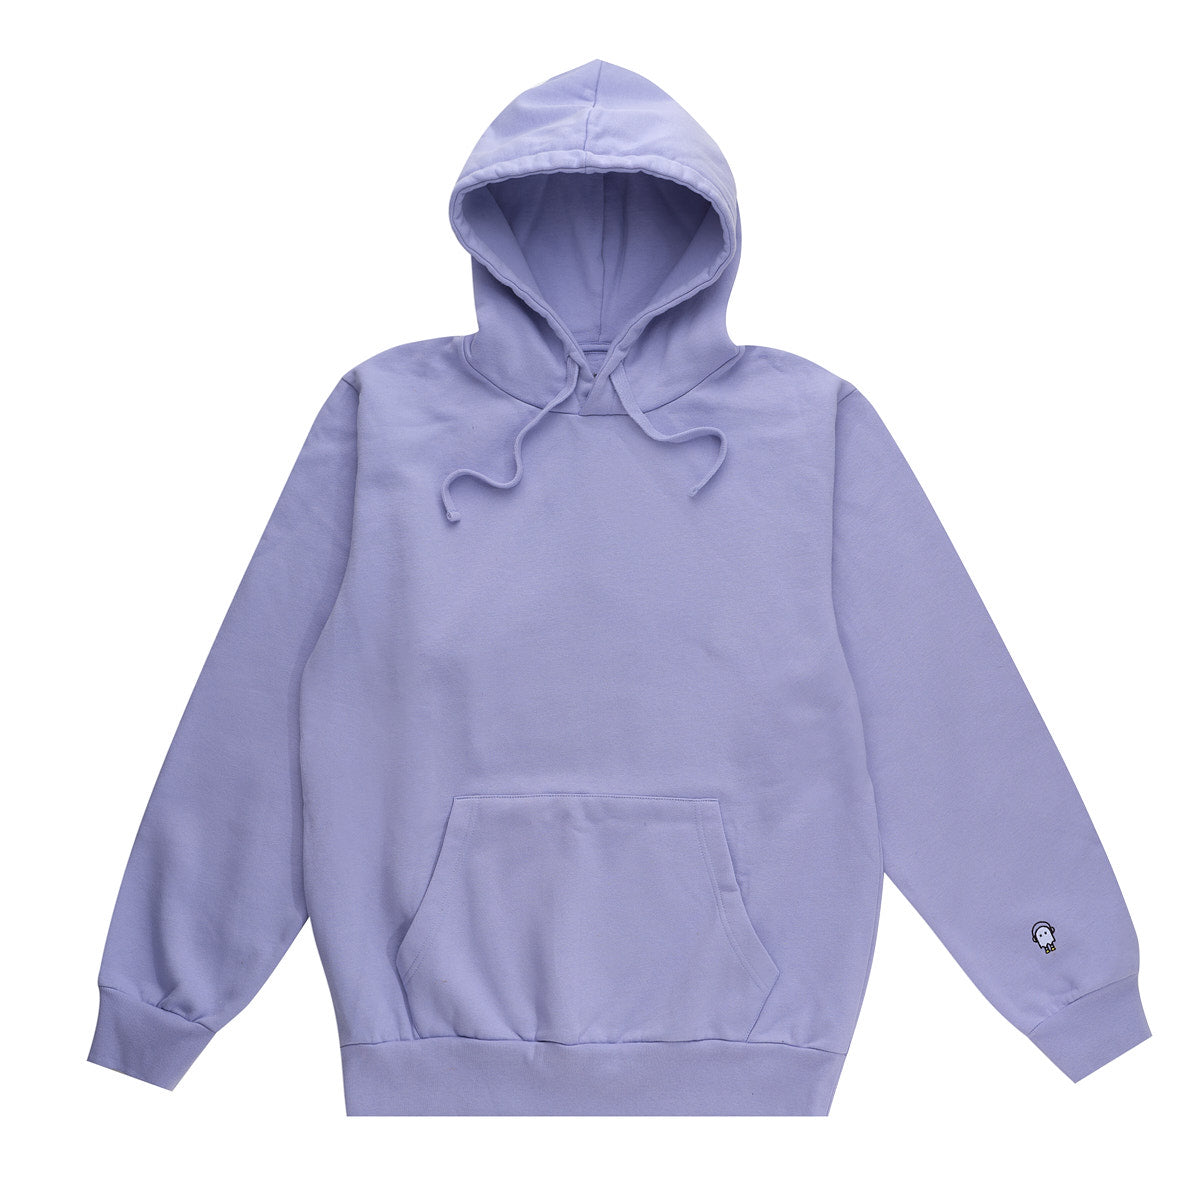 MTGM | Purple 'Working on the Bumper' Hoody – My Therapist Ghosted Me ...